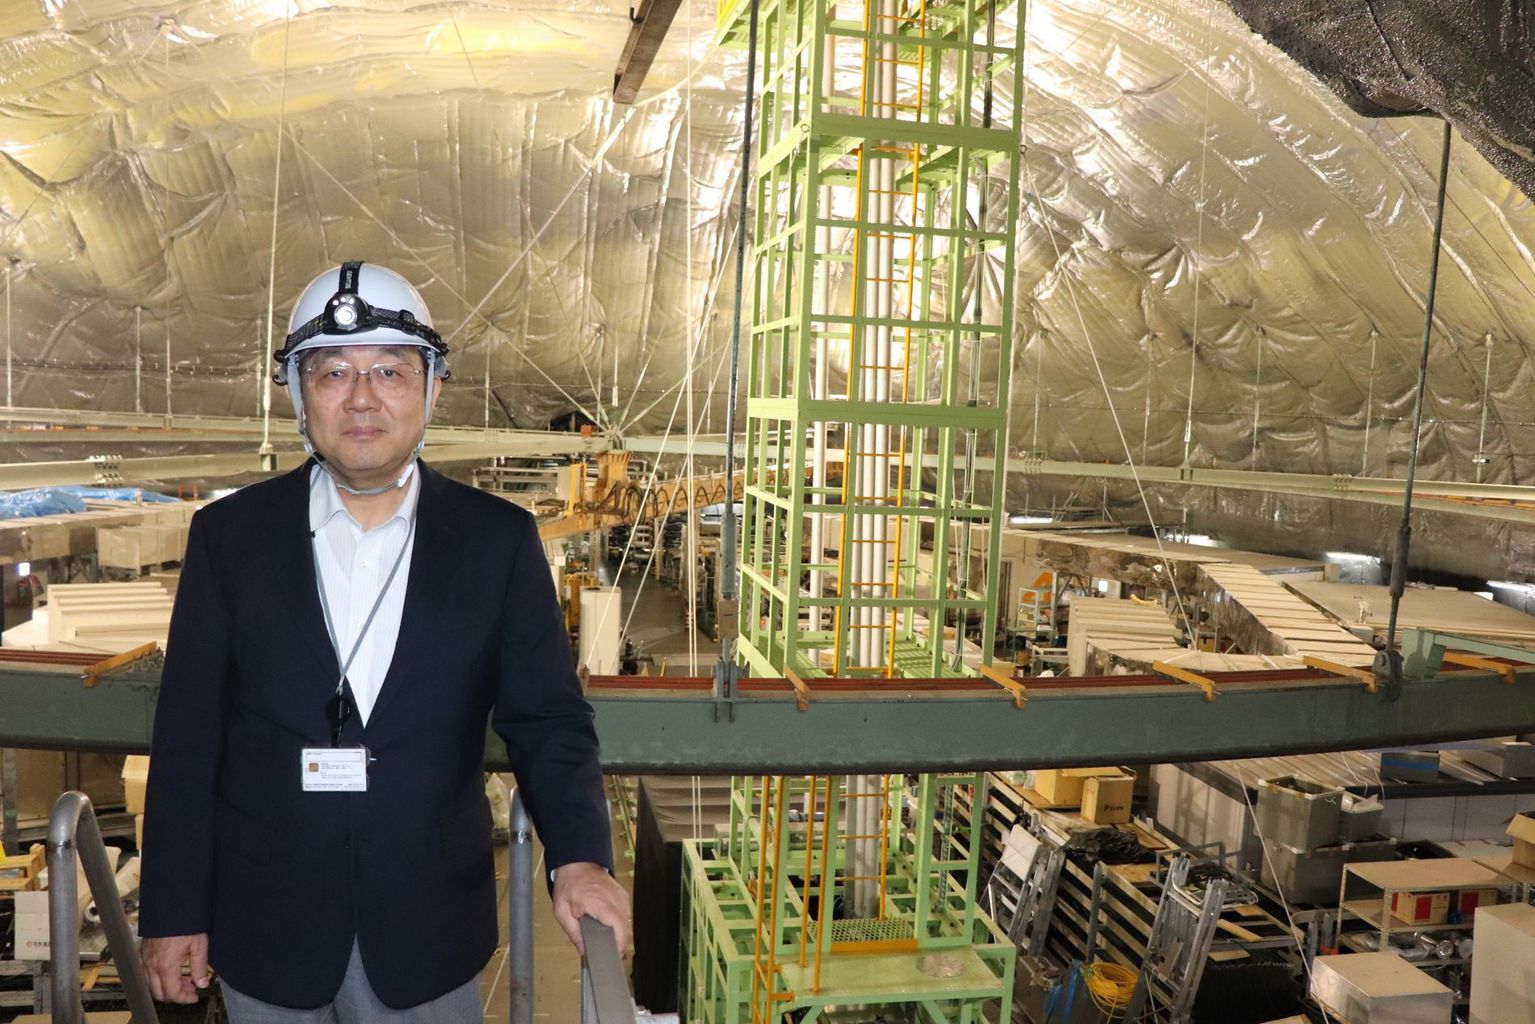 Prof. Nakahata in the rock cavern 1000 meters below ground. Directly below is the huge water tank with which the Super-Kamiokande detects neutrinos. Photo: B. Vogel